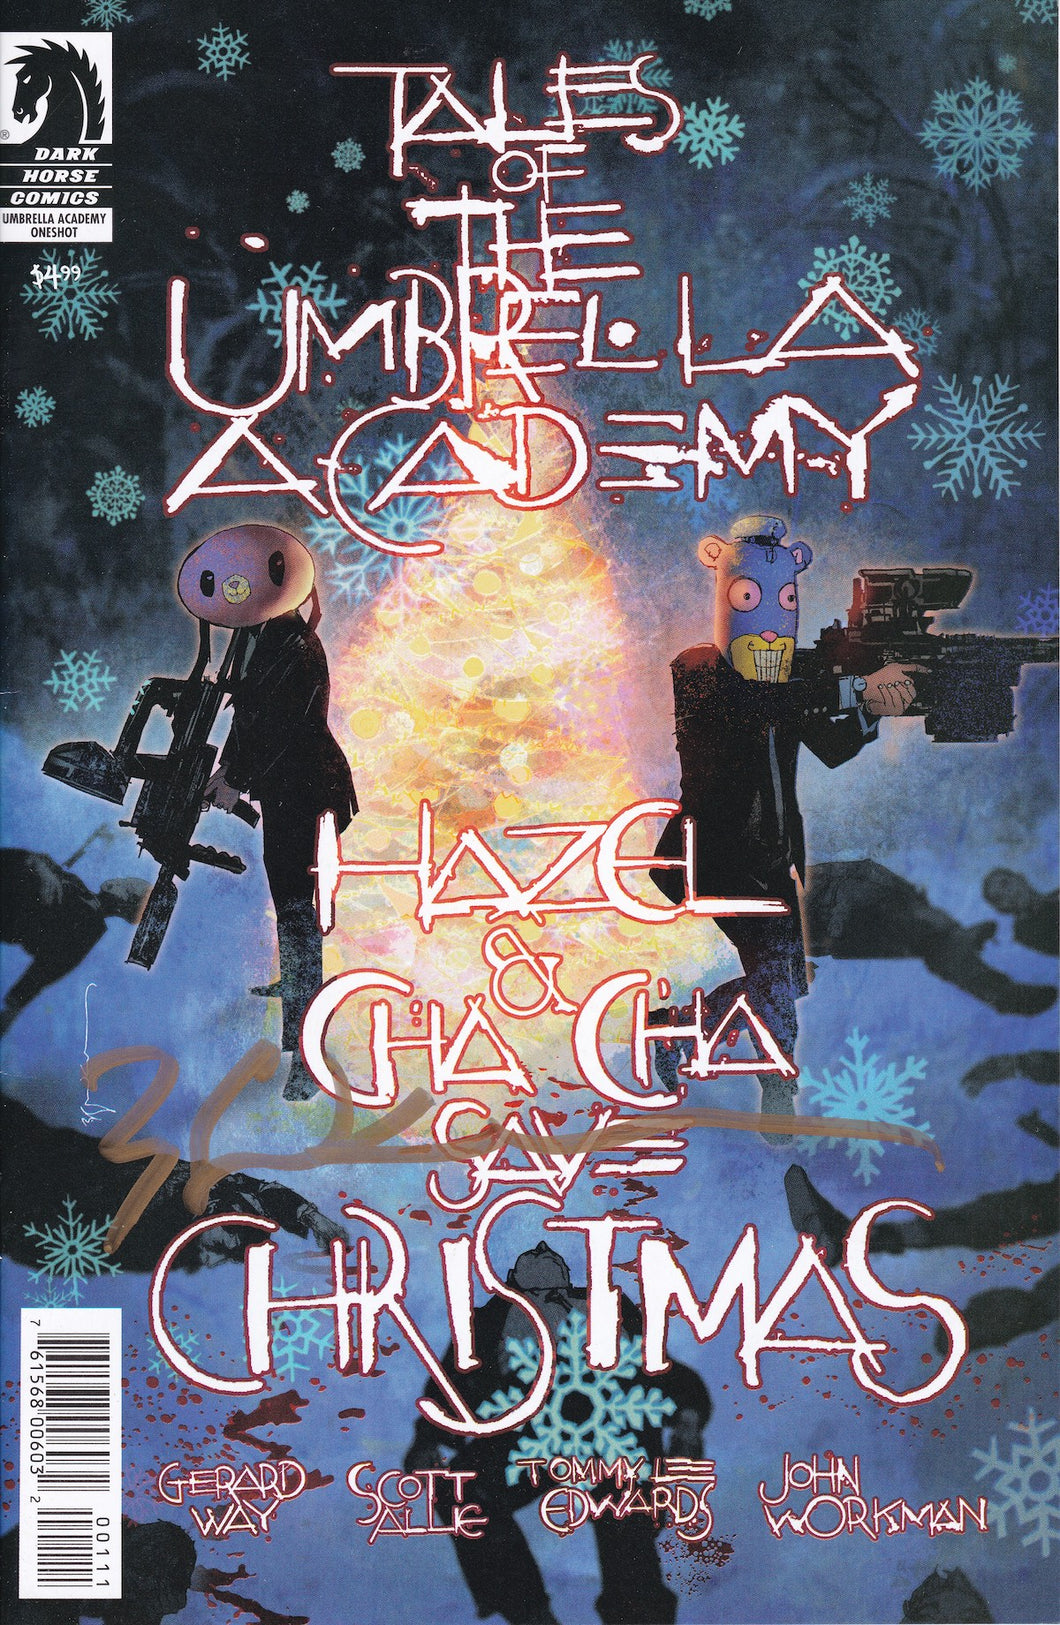 Tales of Umbrella Academy Hazel & ChaCha Save Christmas LCSD Variant Signed